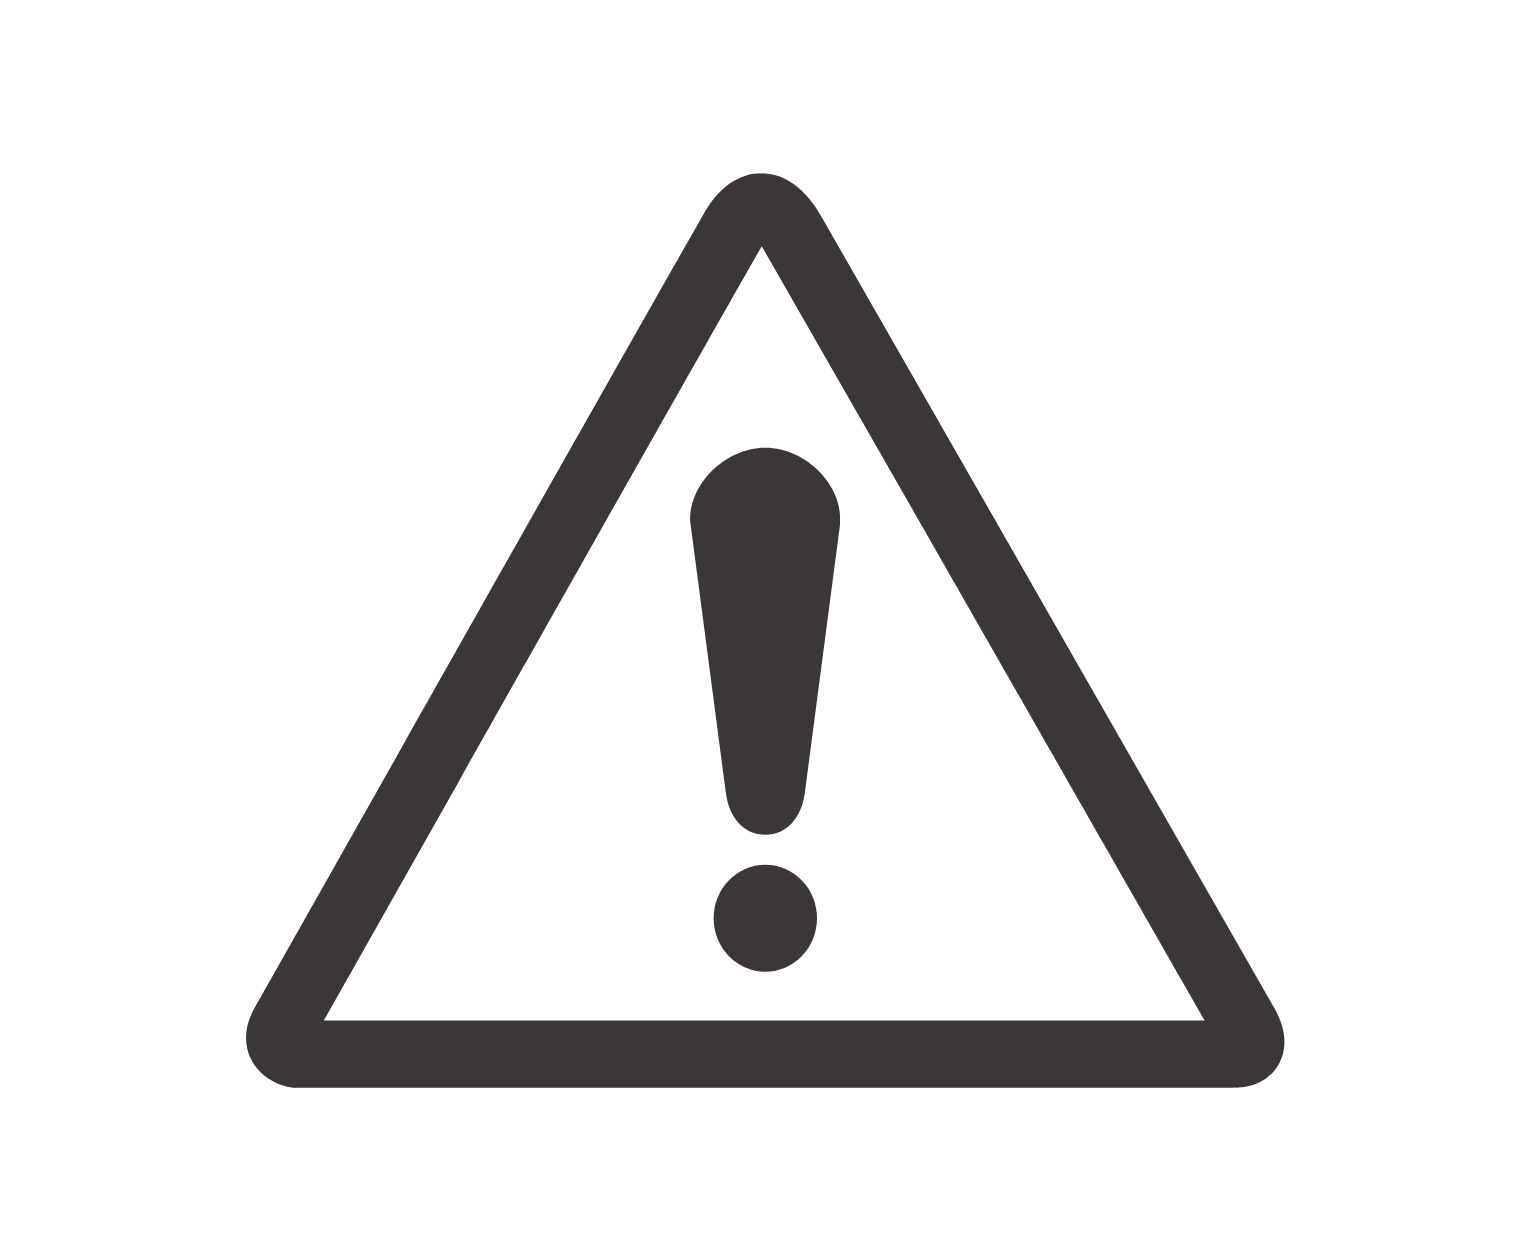 Safety Icon - Exclamation mark in a triangle